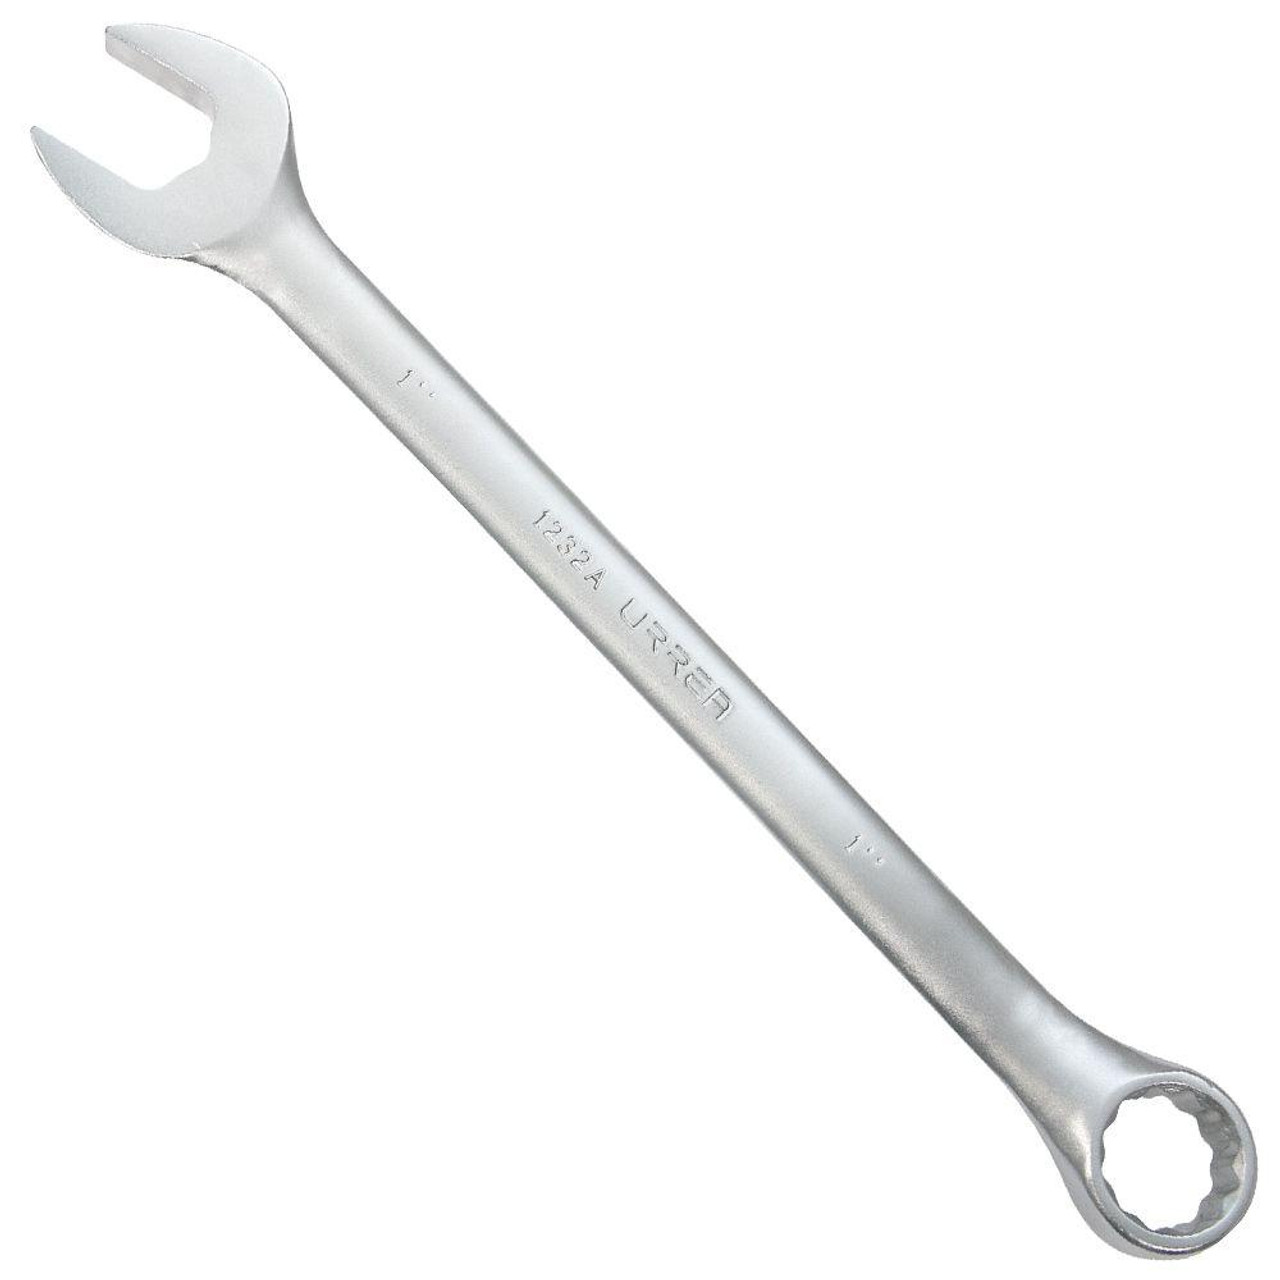 Satin finish combination wrench, Size: 1-1/2, 12 point, Tool Length: 23"